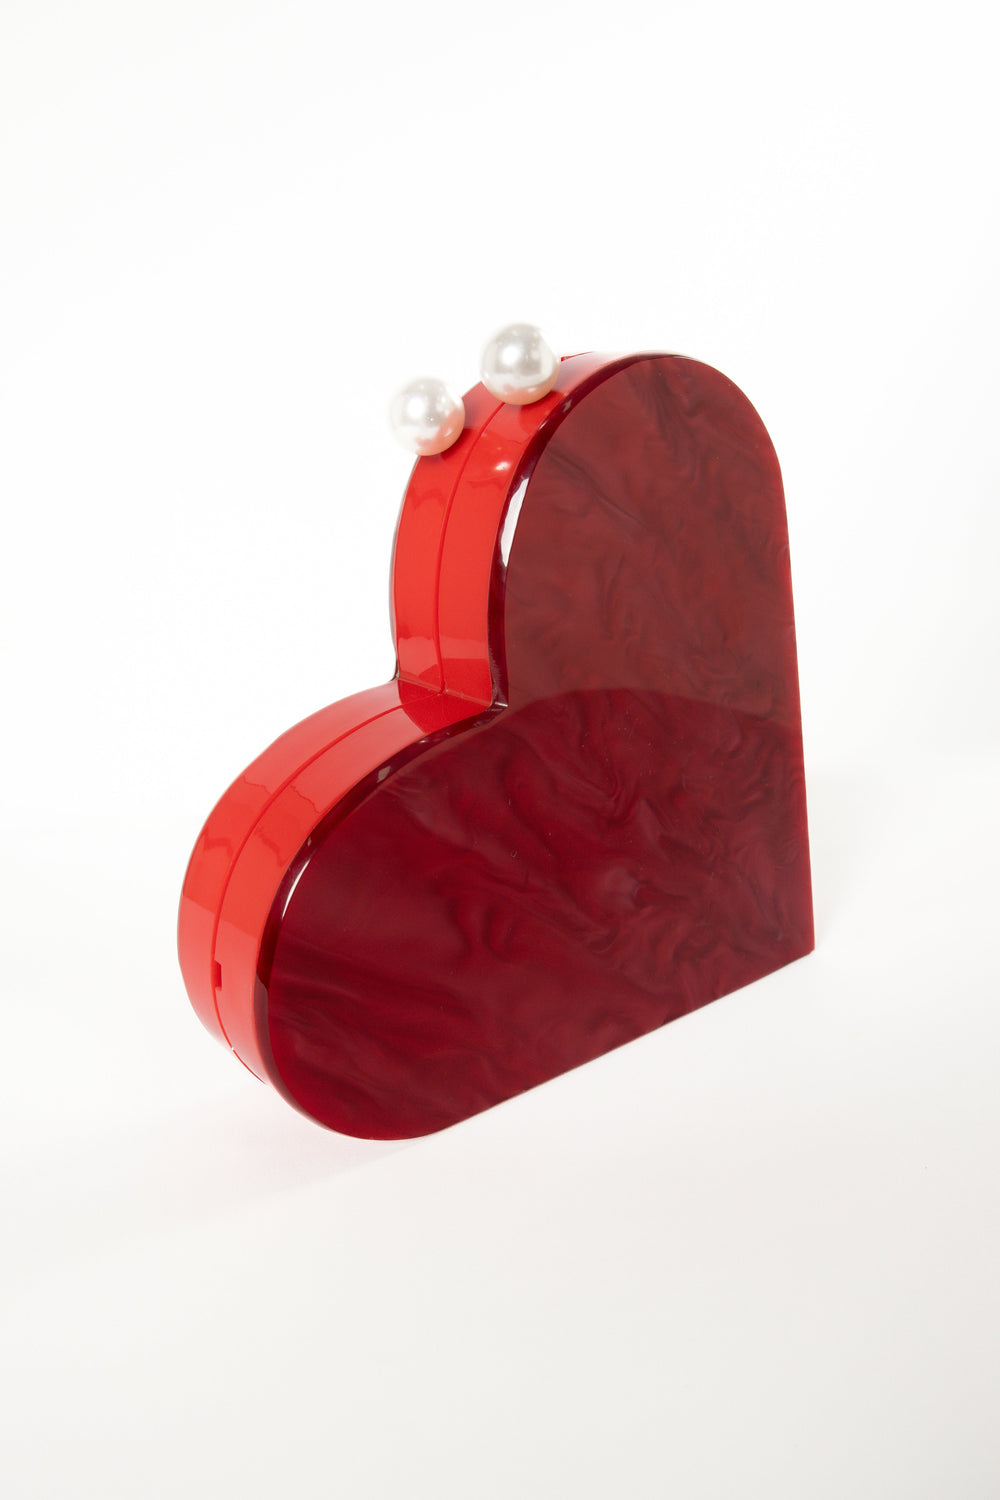 Petal and Pup USA ACCESSORIES Heart Shaped Bag - Red One Size